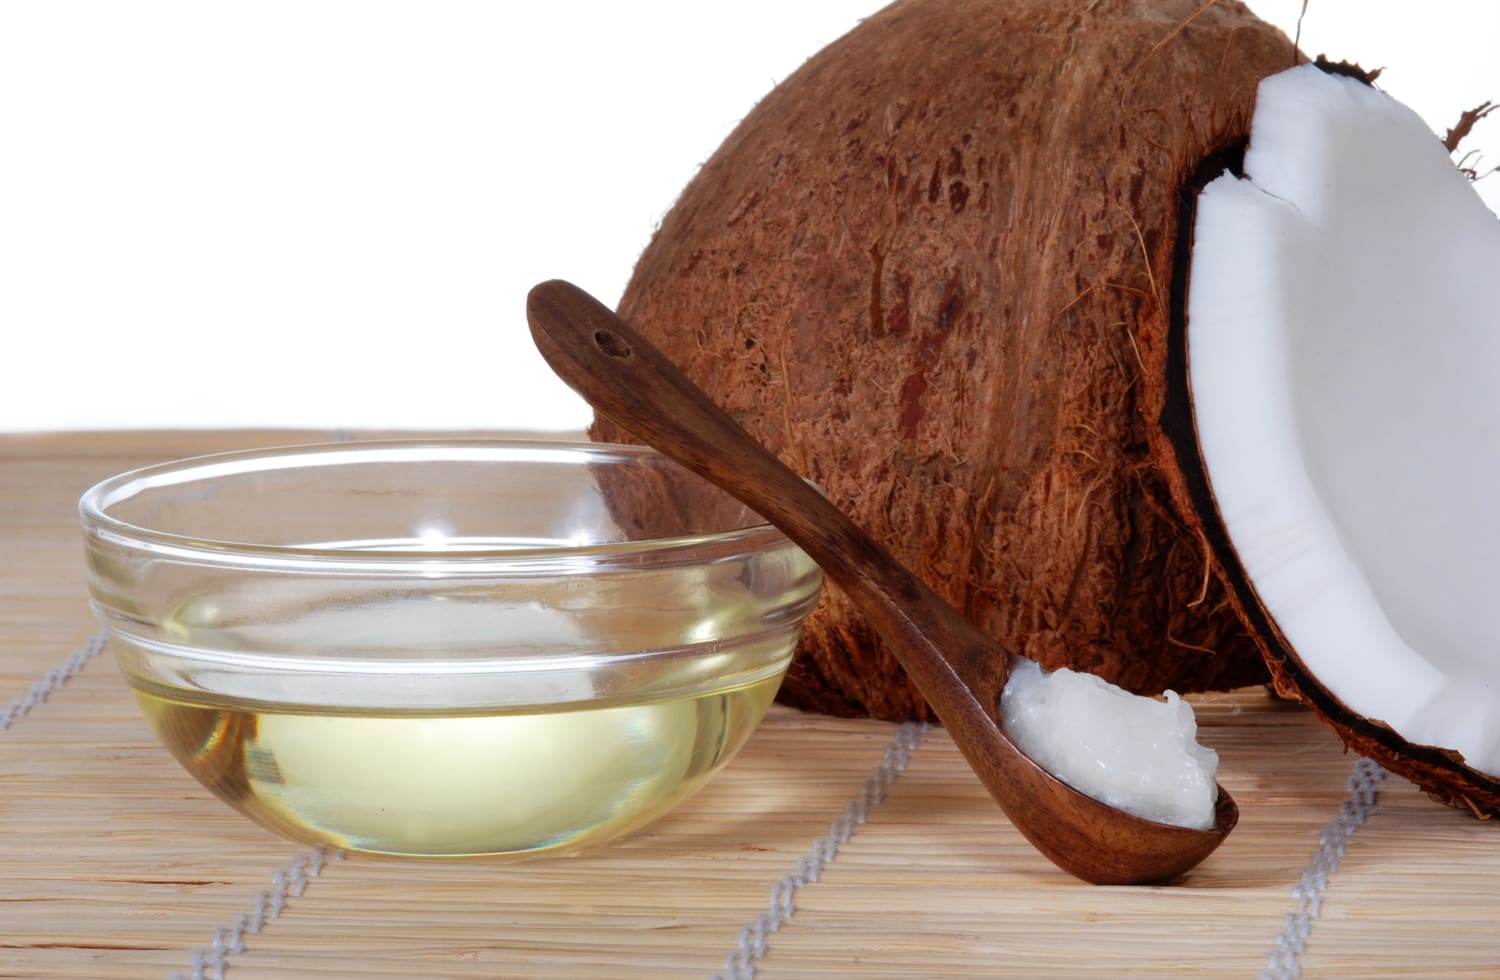 Can You Use Coconut Oil As Lubricant